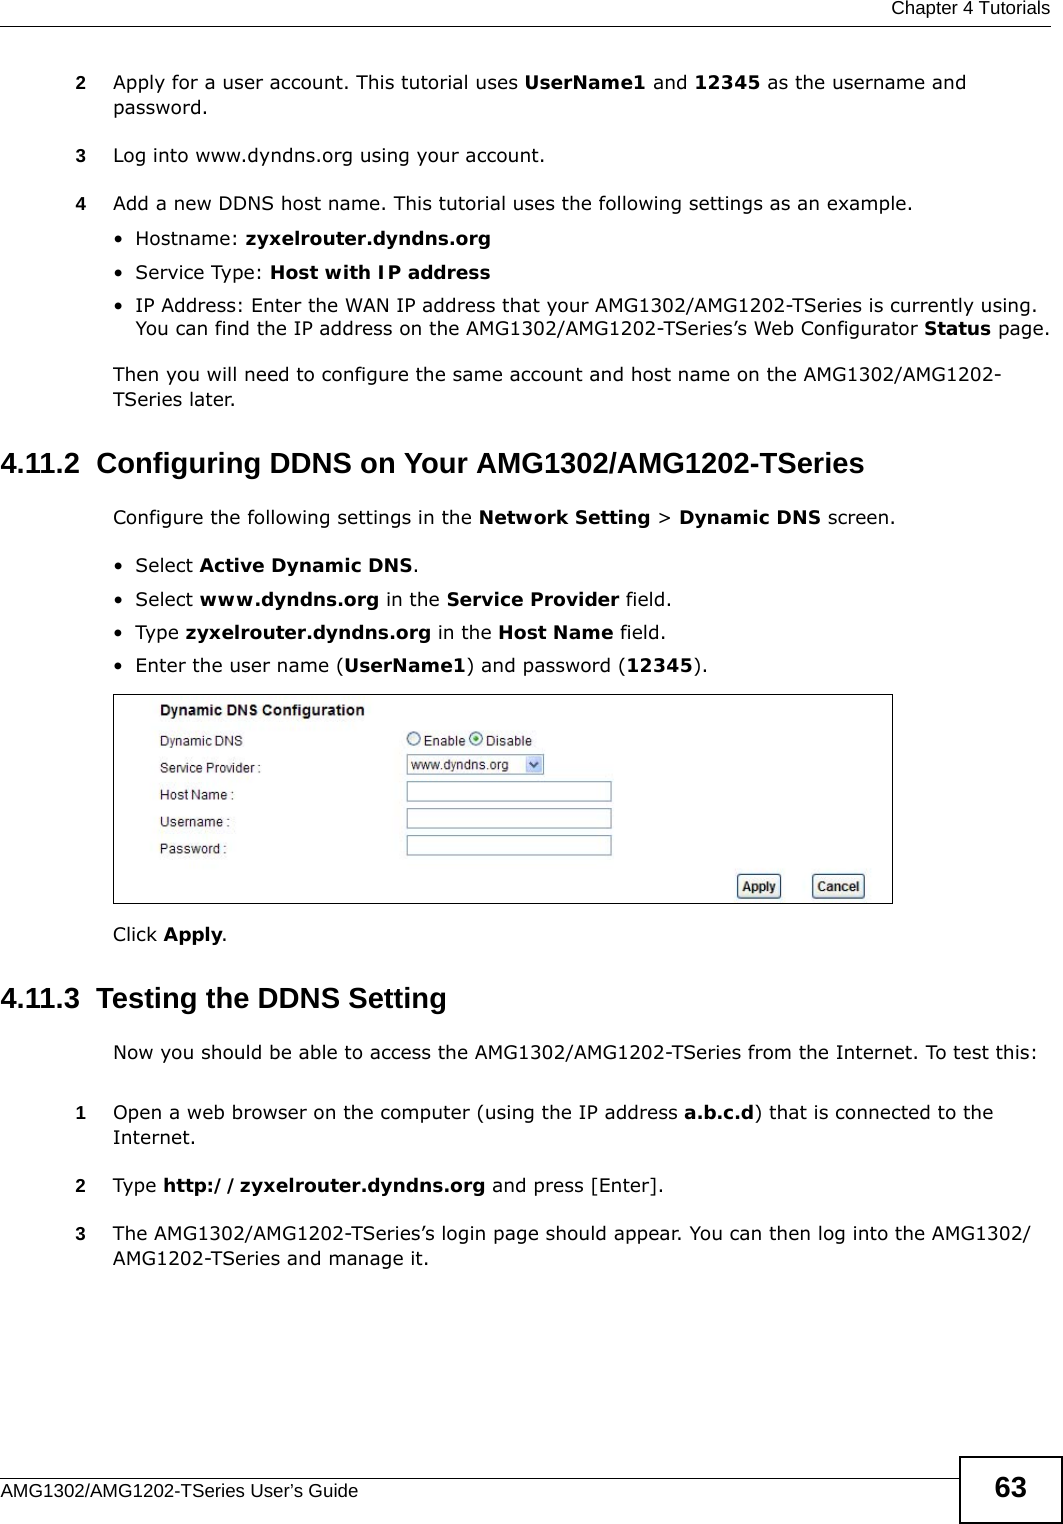  Chapter 4 TutorialsAMG1302/AMG1202-TSeries User’s Guide 632Apply for a user account. This tutorial uses UserName1 and 12345 as the username and password.3Log into www.dyndns.org using your account.4Add a new DDNS host name. This tutorial uses the following settings as an example.•Hostname: zyxelrouter.dyndns.org•Service Type: Host with IP address• IP Address: Enter the WAN IP address that your AMG1302/AMG1202-TSeries is currently using. You can find the IP address on the AMG1302/AMG1202-TSeries’s Web Configurator Status page.Then you will need to configure the same account and host name on the AMG1302/AMG1202-TSeries later.4.11.2  Configuring DDNS on Your AMG1302/AMG1202-TSeriesConfigure the following settings in the Network Setting &gt; Dynamic DNS screen.•Select Active Dynamic DNS.•Select www.dyndns.org in the Service Provider field.•Type zyxelrouter.dyndns.org in the Host Name field.• Enter the user name (UserName1) and password (12345).Click Apply.4.11.3  Testing the DDNS SettingNow you should be able to access the AMG1302/AMG1202-TSeries from the Internet. To test this:1Open a web browser on the computer (using the IP address a.b.c.d) that is connected to the Internet.2Type http://zyxelrouter.dyndns.org and press [Enter].3The AMG1302/AMG1202-TSeries’s login page should appear. You can then log into the AMG1302/AMG1202-TSeries and manage it.